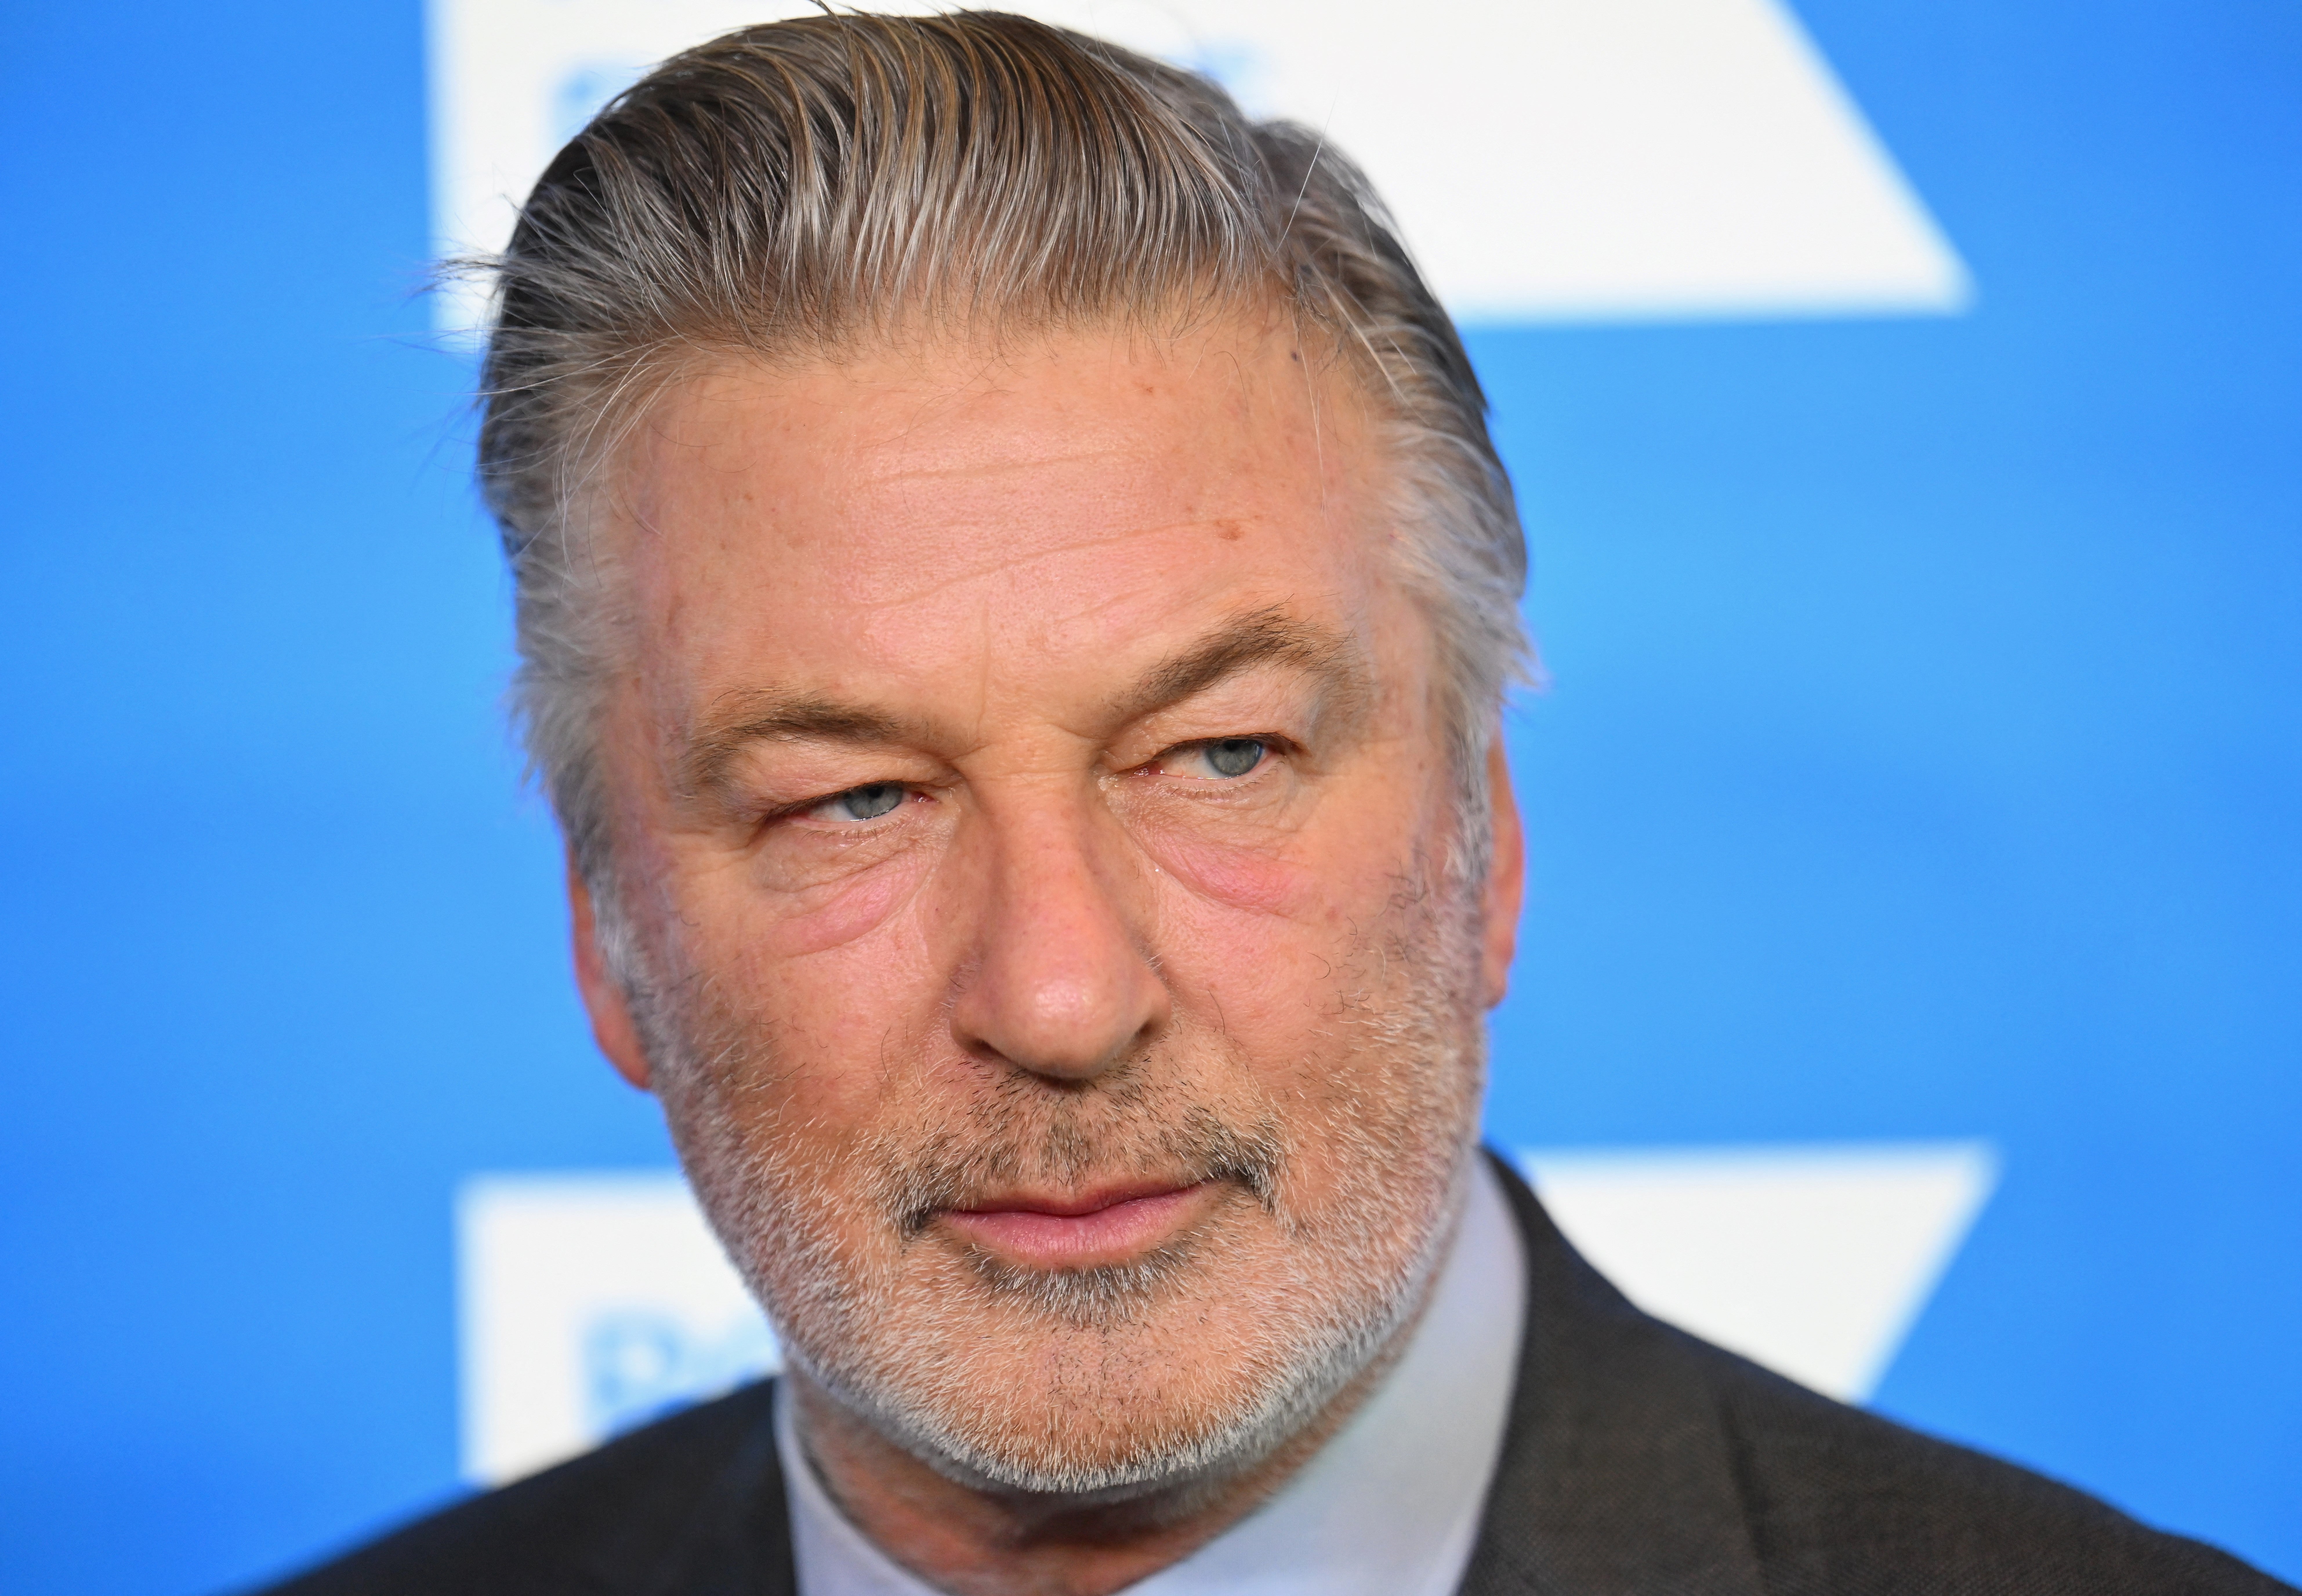 A grand jury charged Alec Baldwin with involuntary manslaughter on 19 January